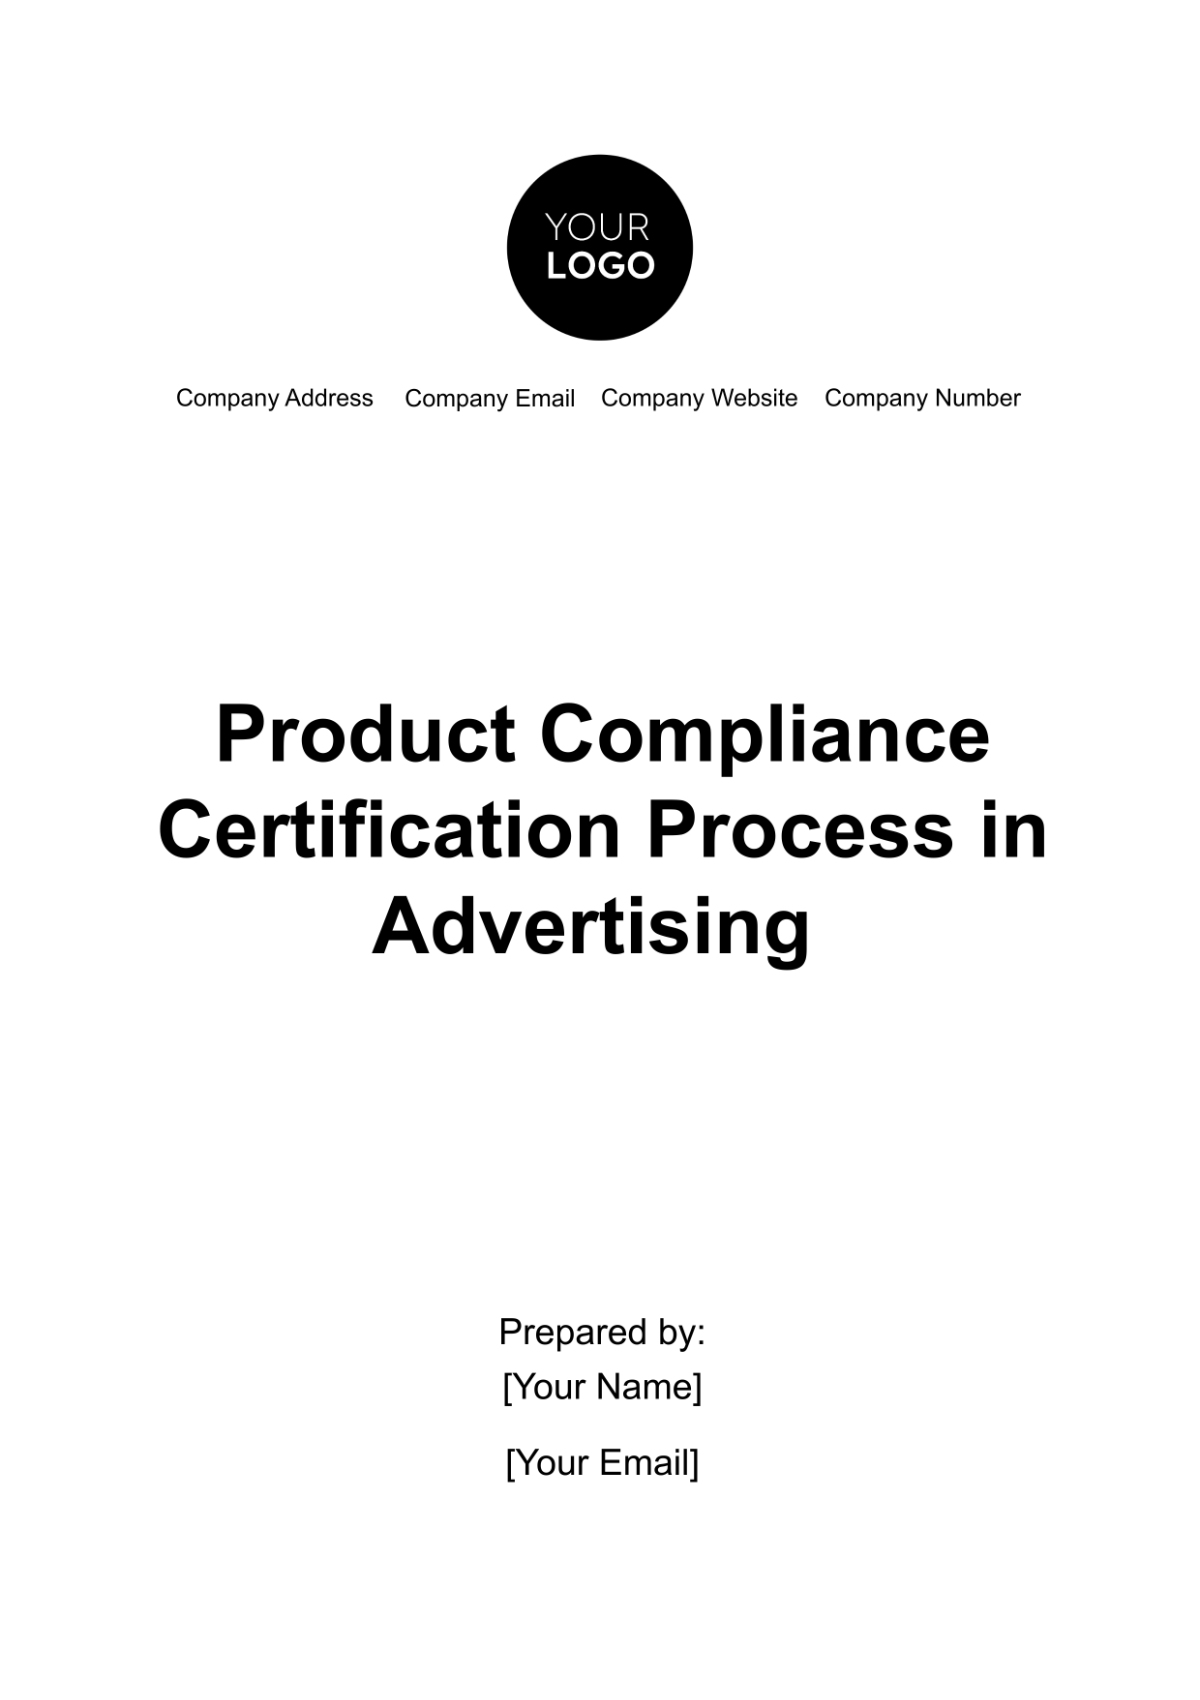 Free Product Compliance Certification Process in Advertising Template